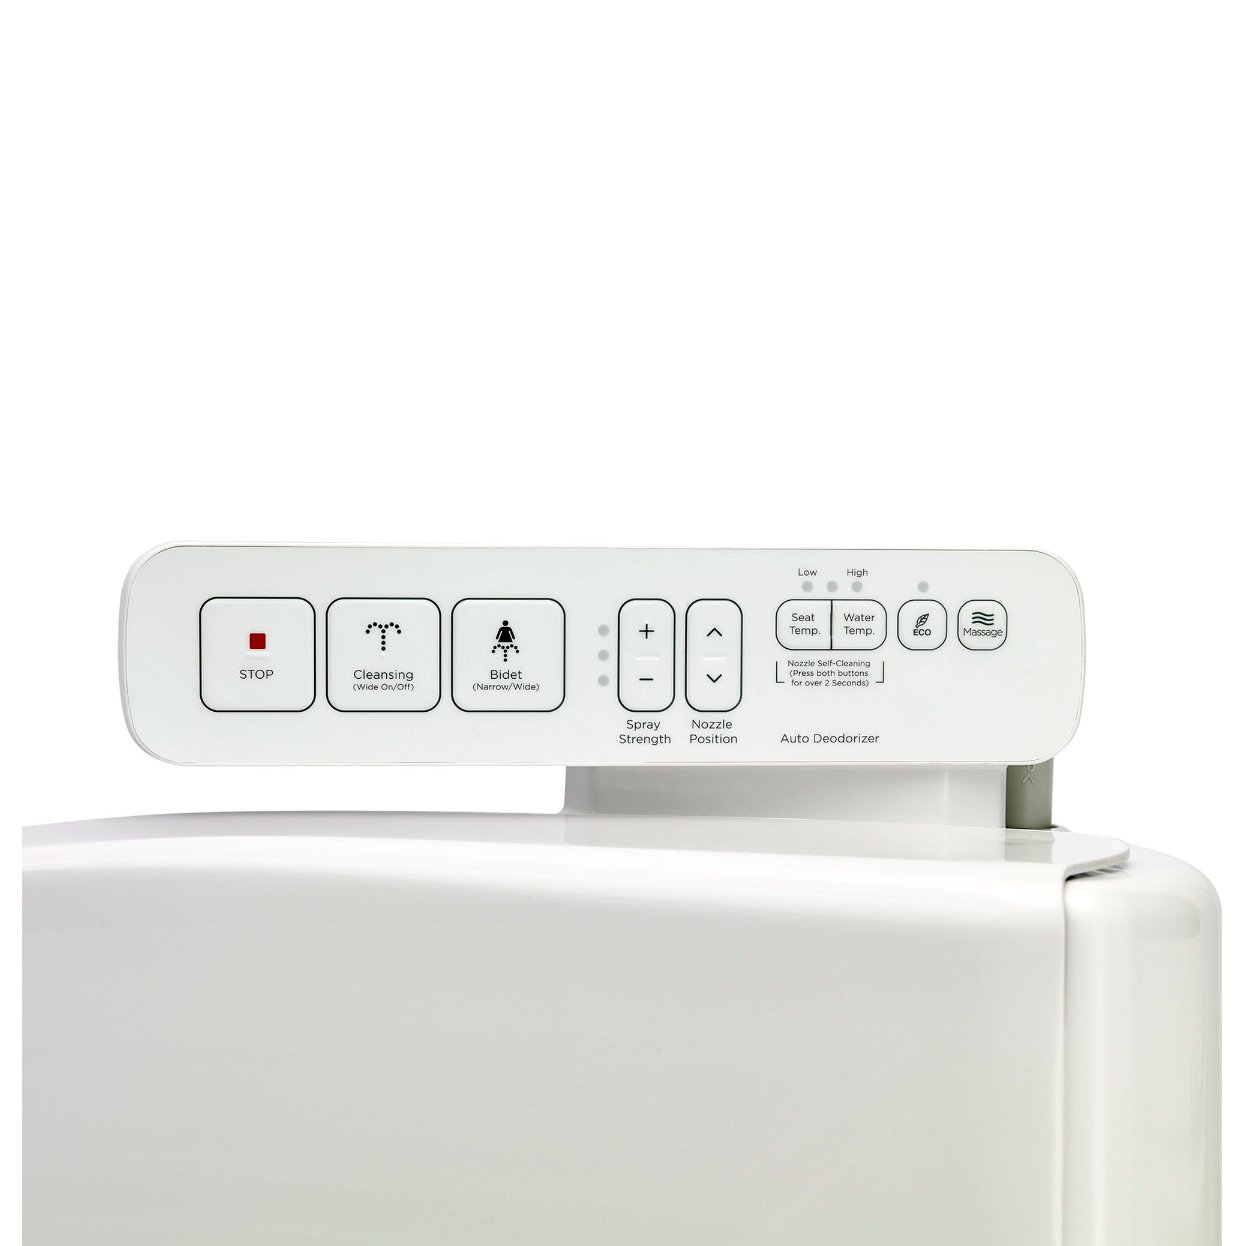 American Standard Advanced Clean 1.0 Electric SpaLet Bidet Seat With Side Panel Operation - Elongated